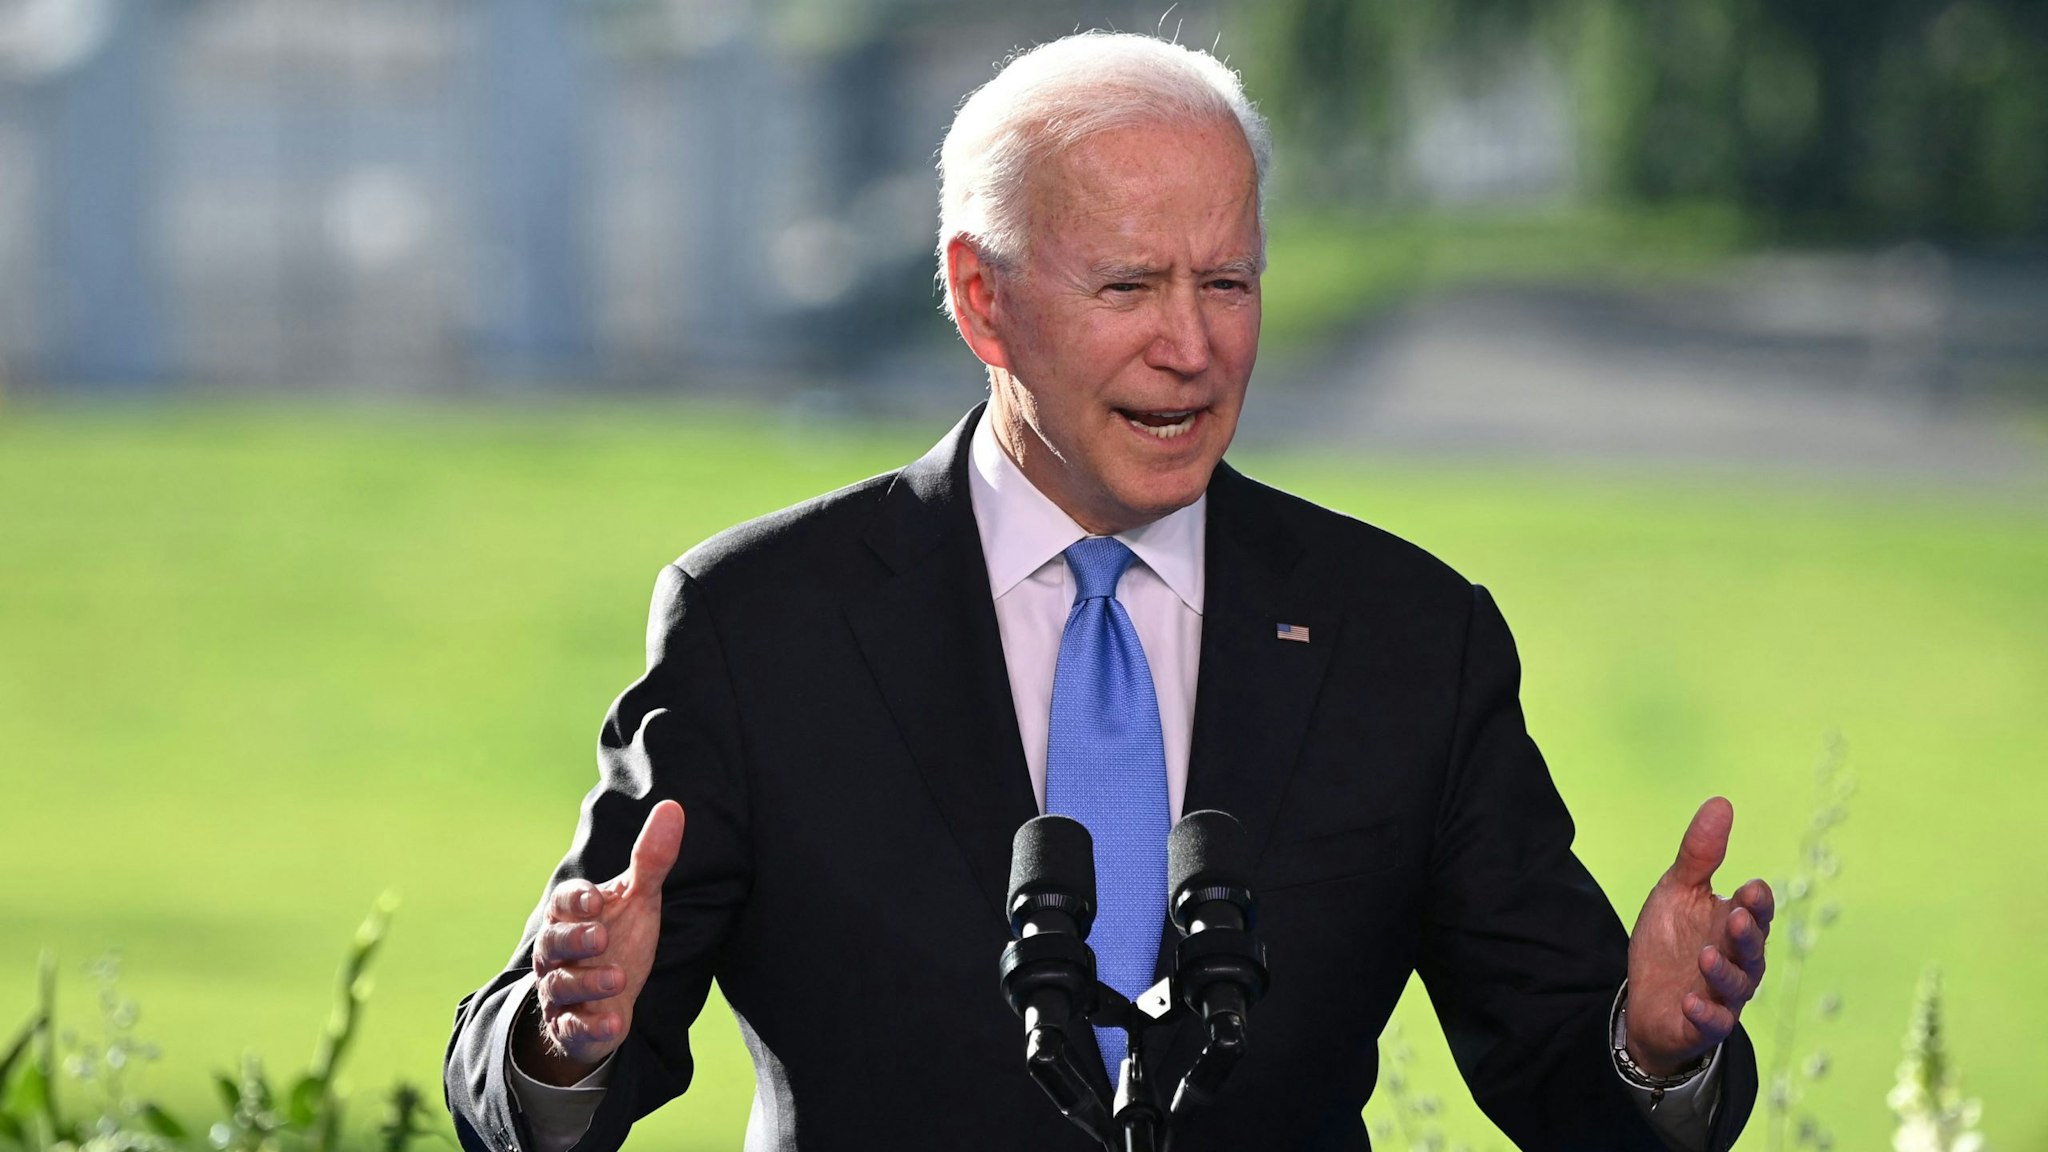 US President Joe Biden holds a press conference after the US-Russia summit in Geneva on June 16, 2021.